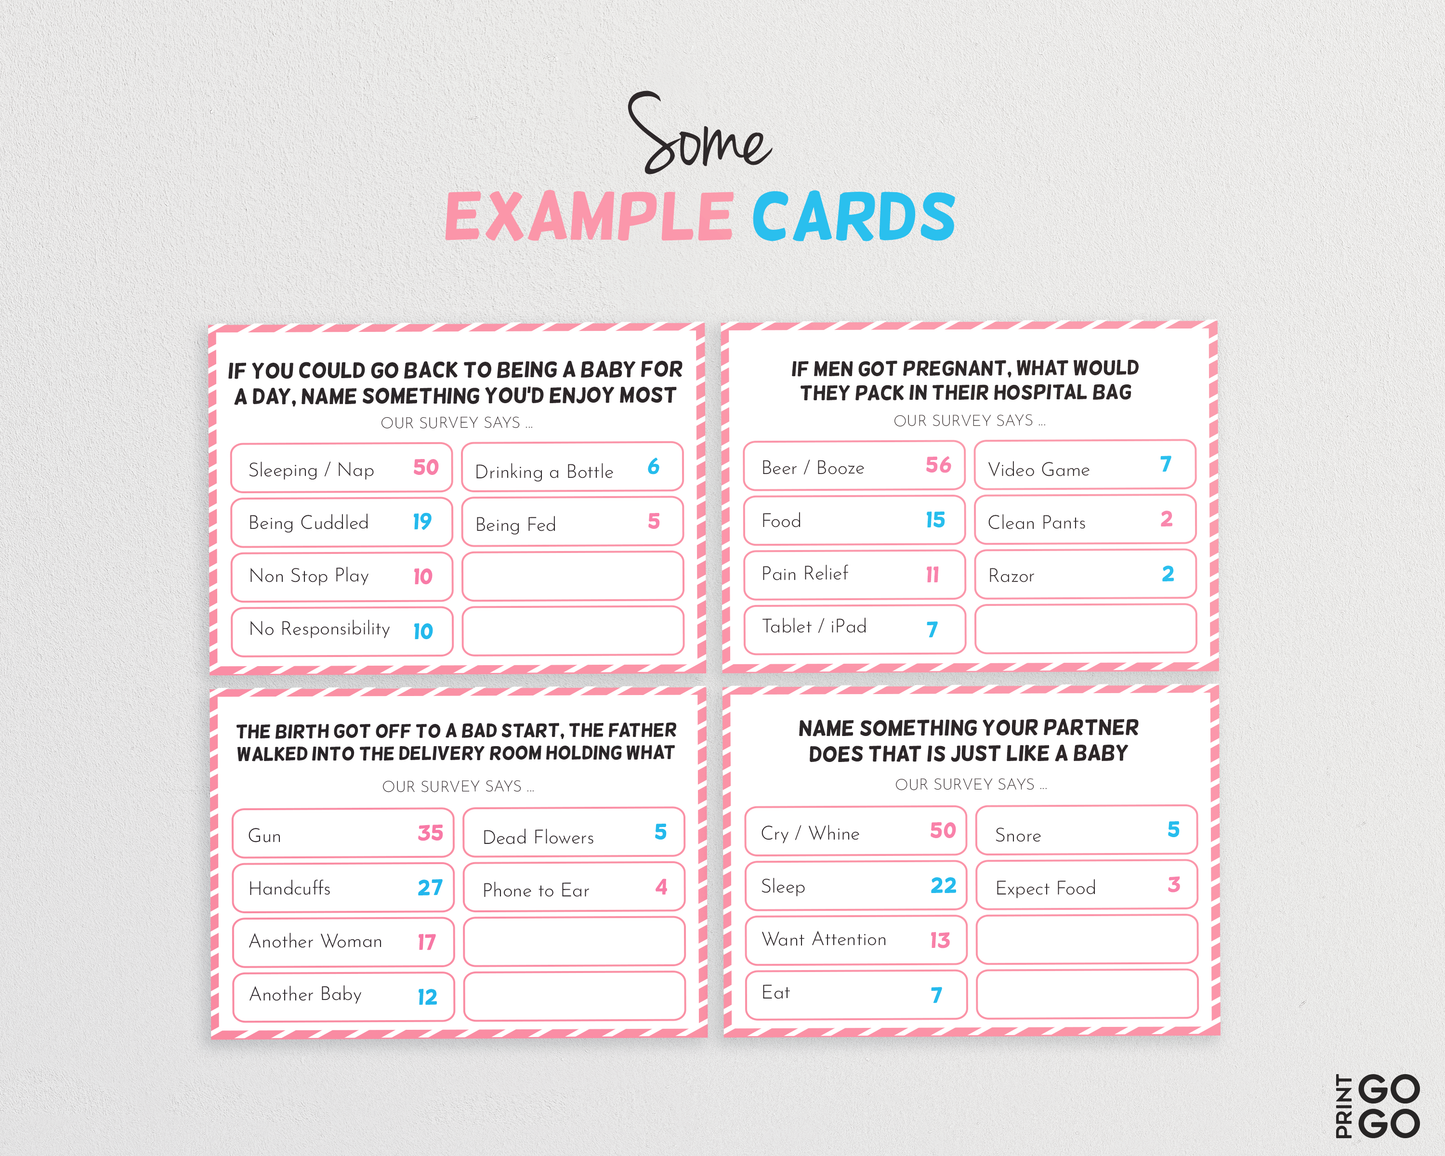 Baby shower friendly feud example cards.